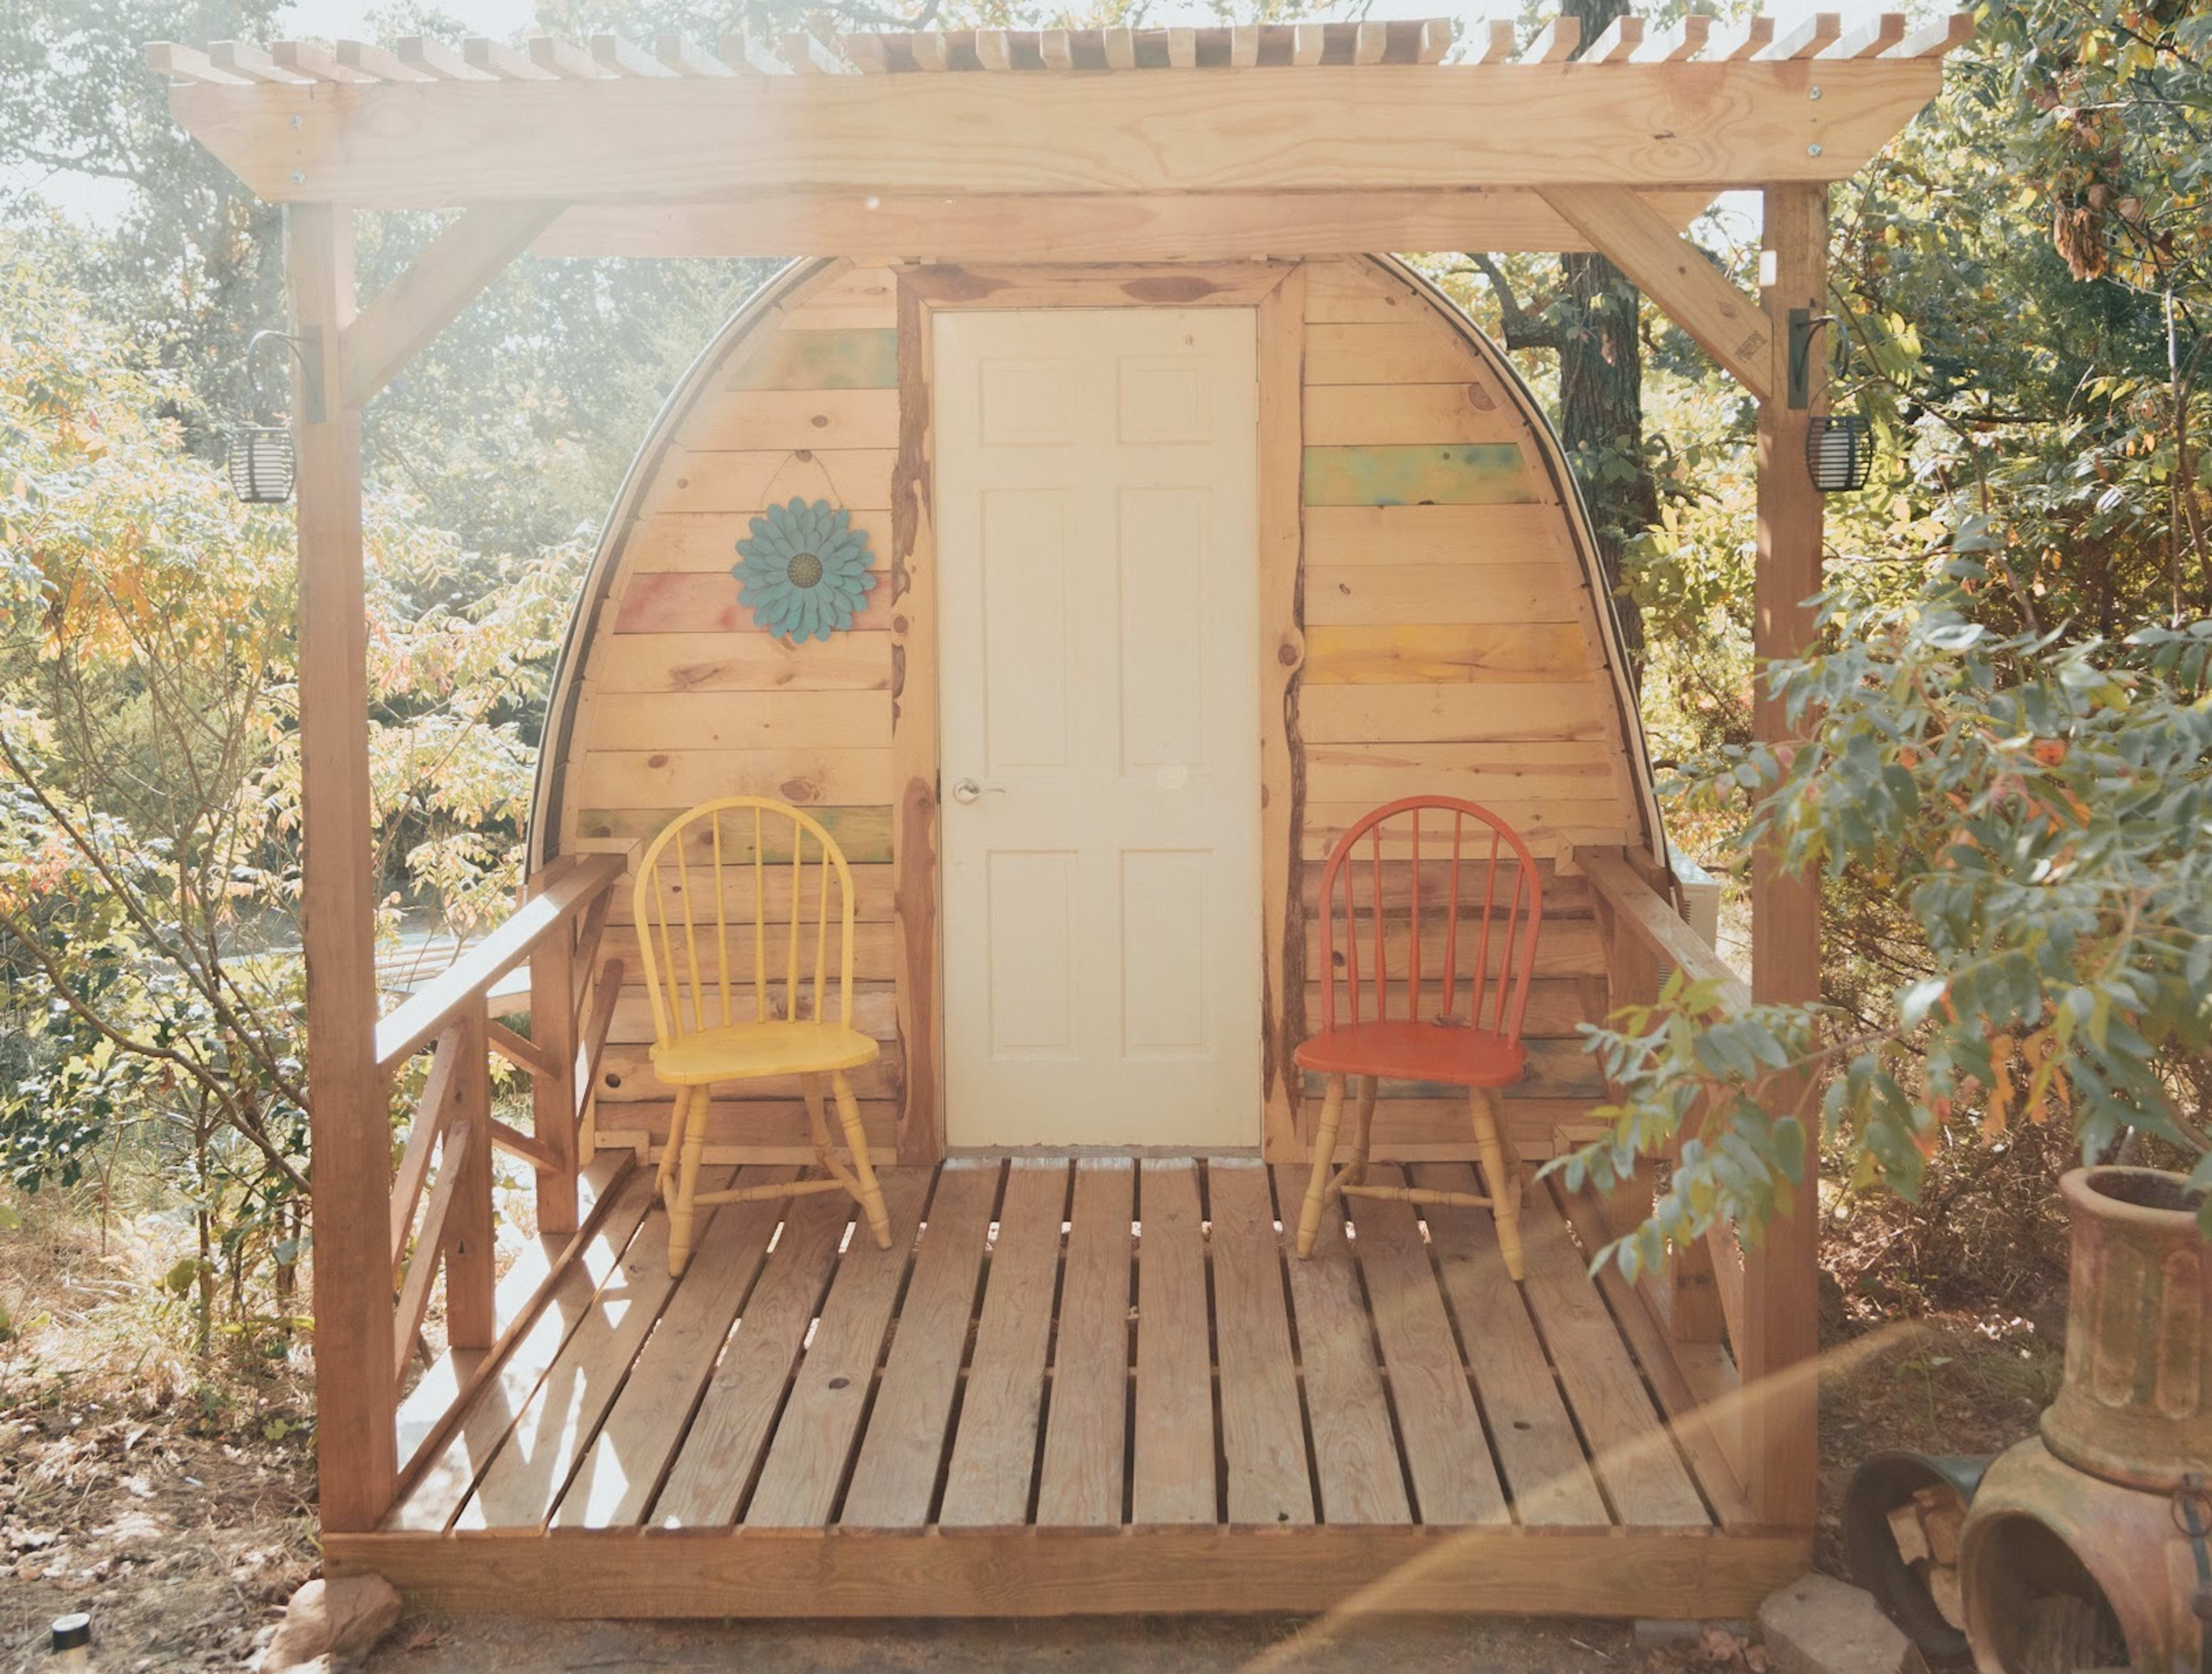 How This Hipcamp Host Began Offering Glamping with a DIY Domed Cabin